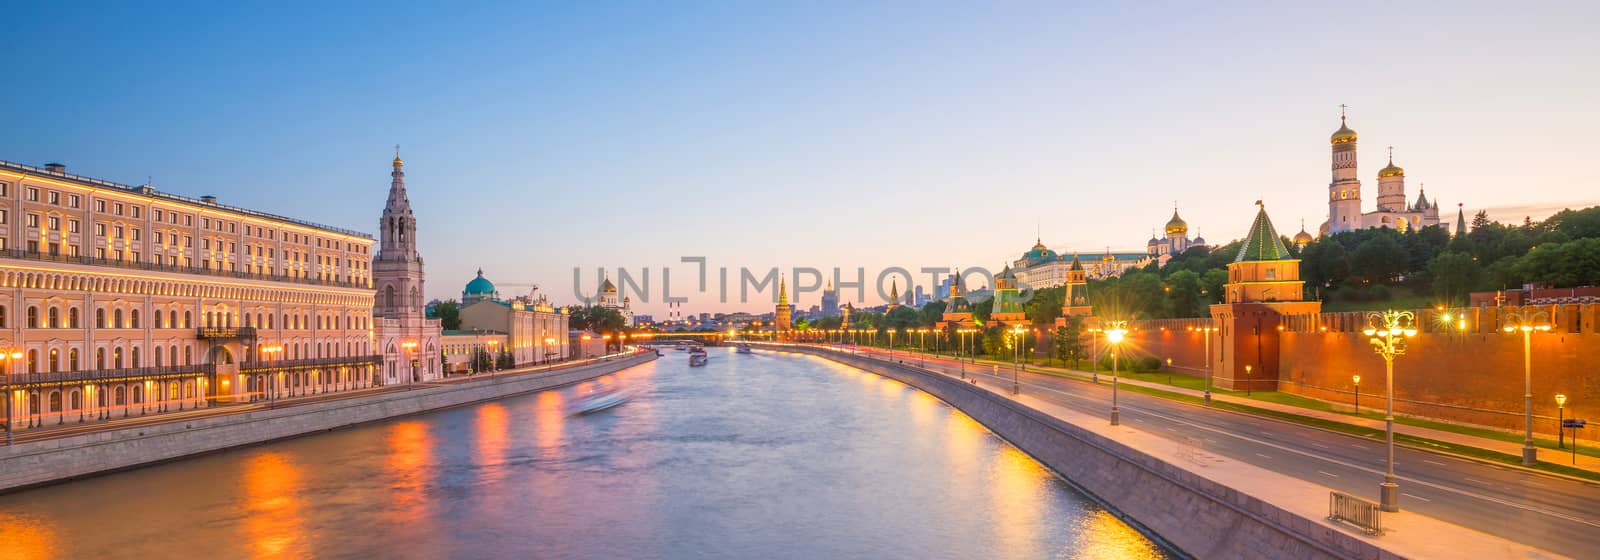 Panoramic view of the Moscow river and the Kremlin palace in Russia at sunset